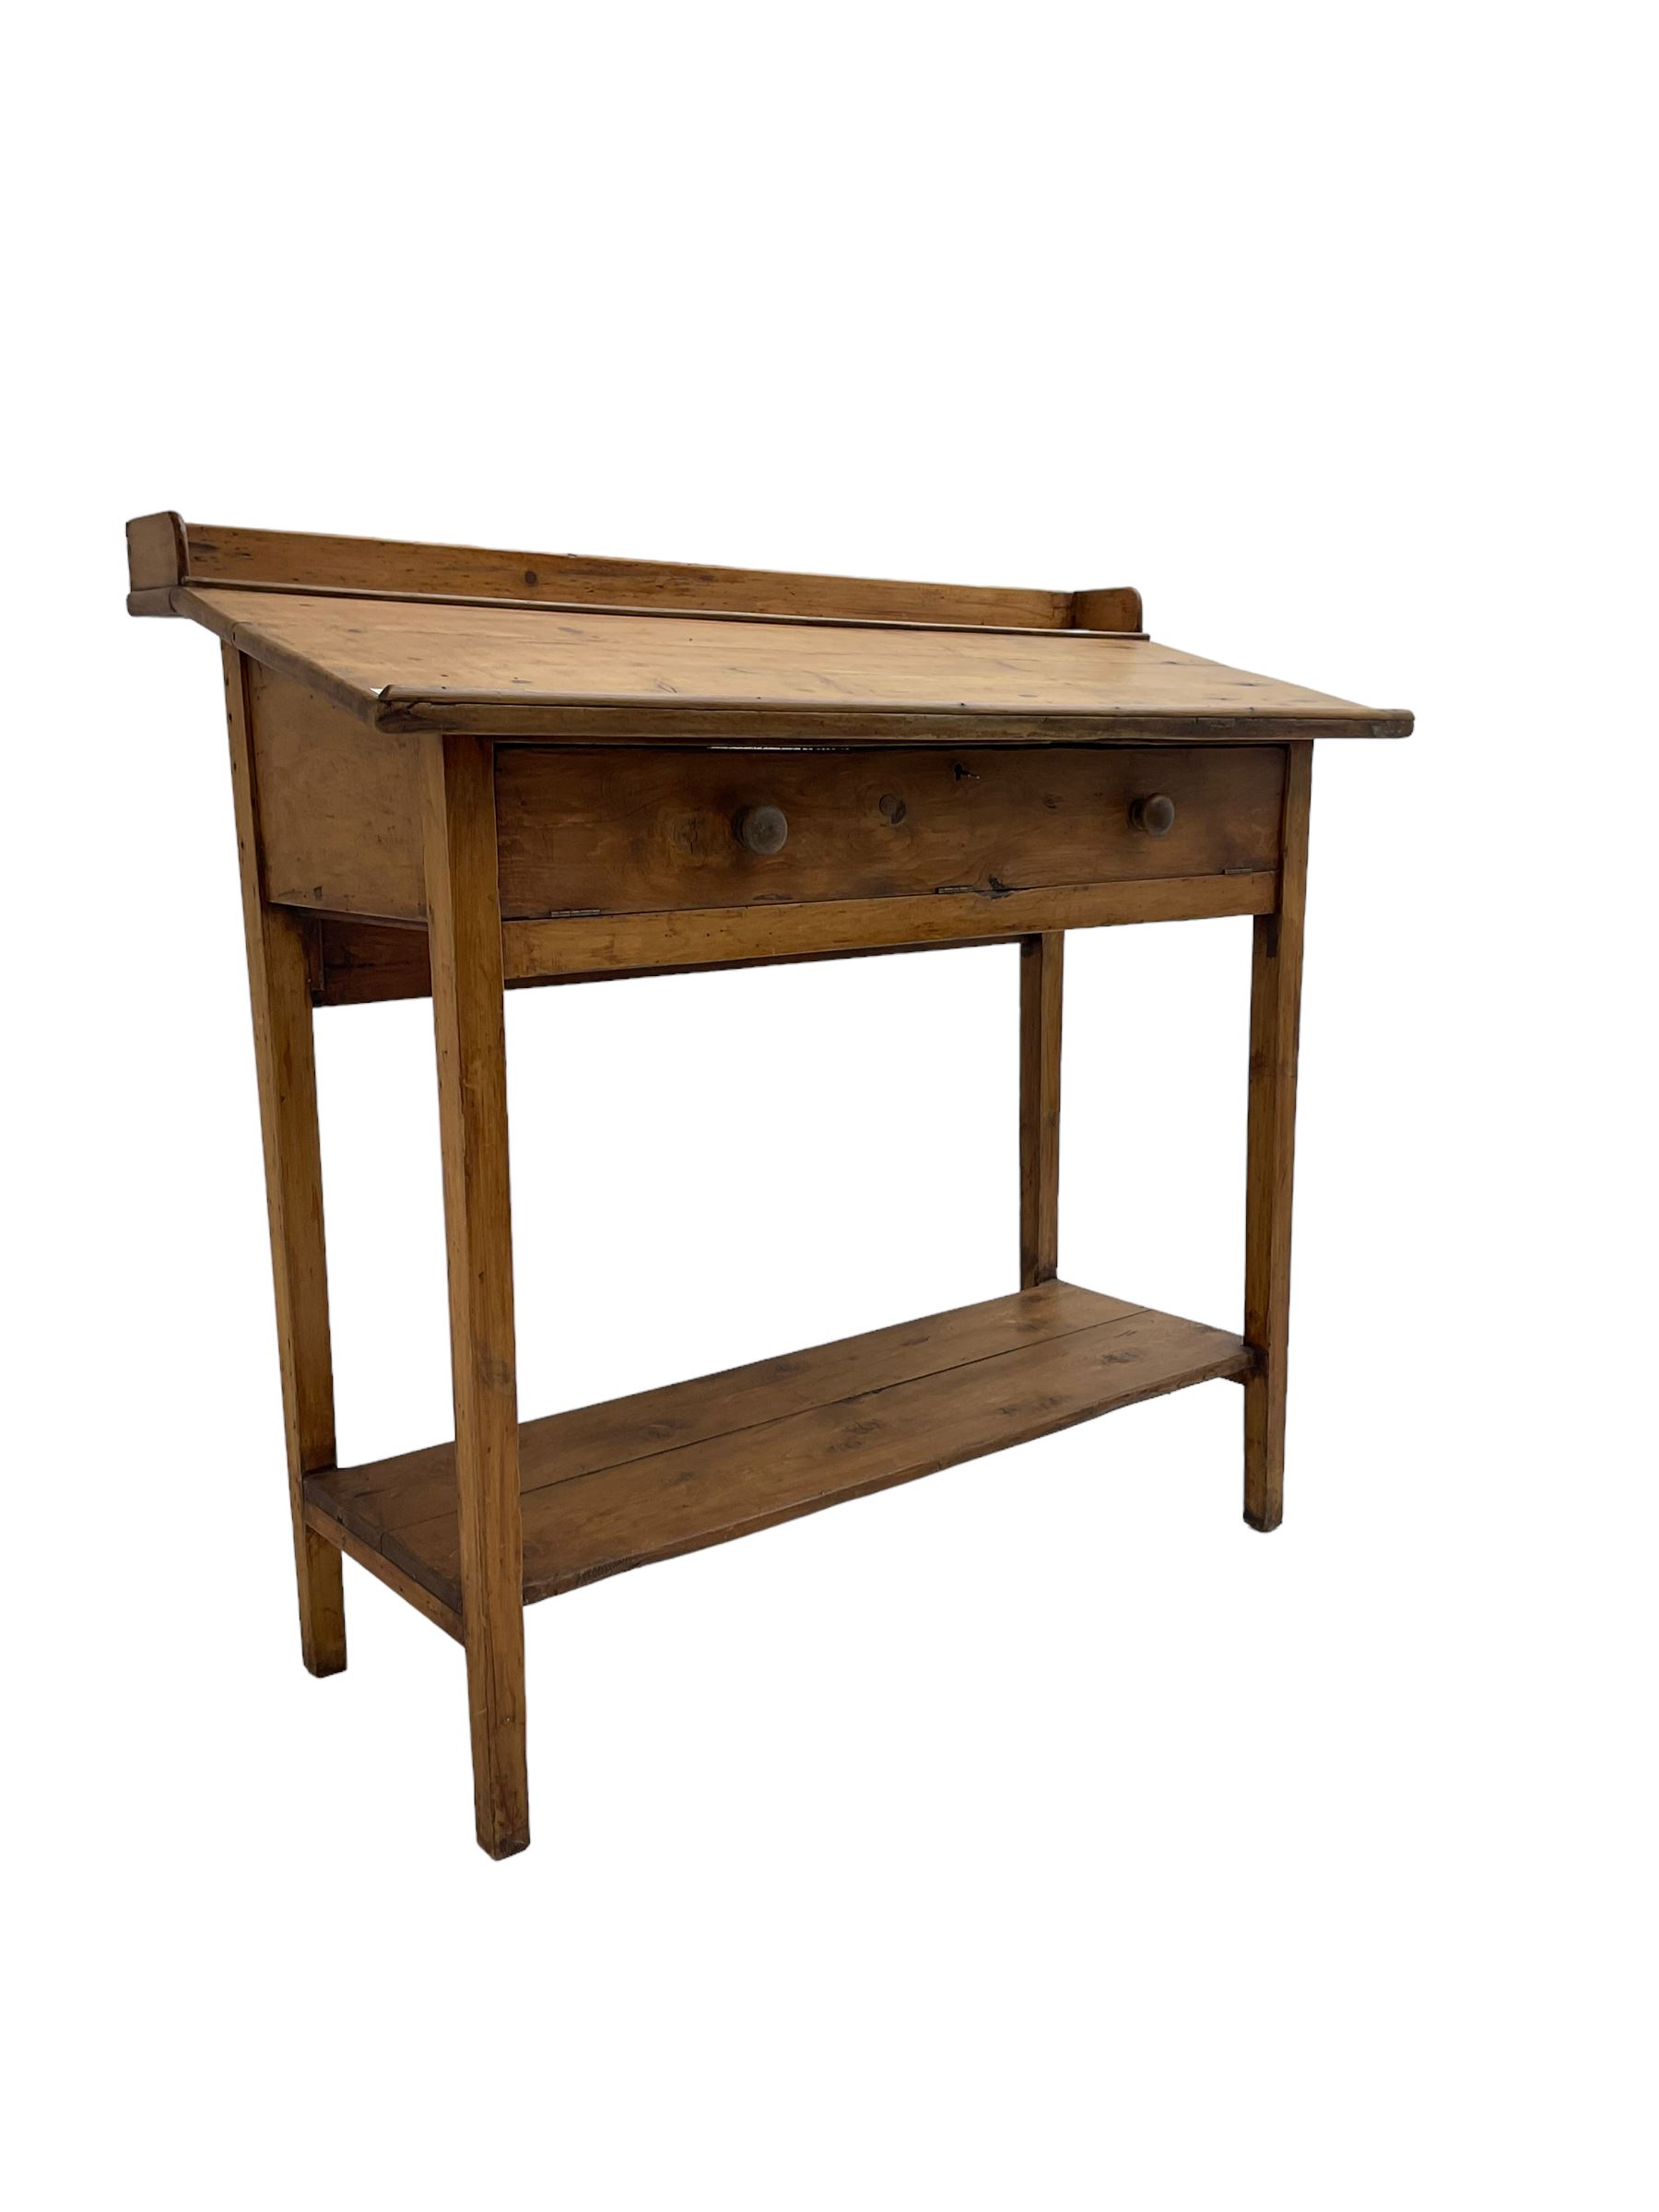 Stained pine clerks desk or table - Image 3 of 6